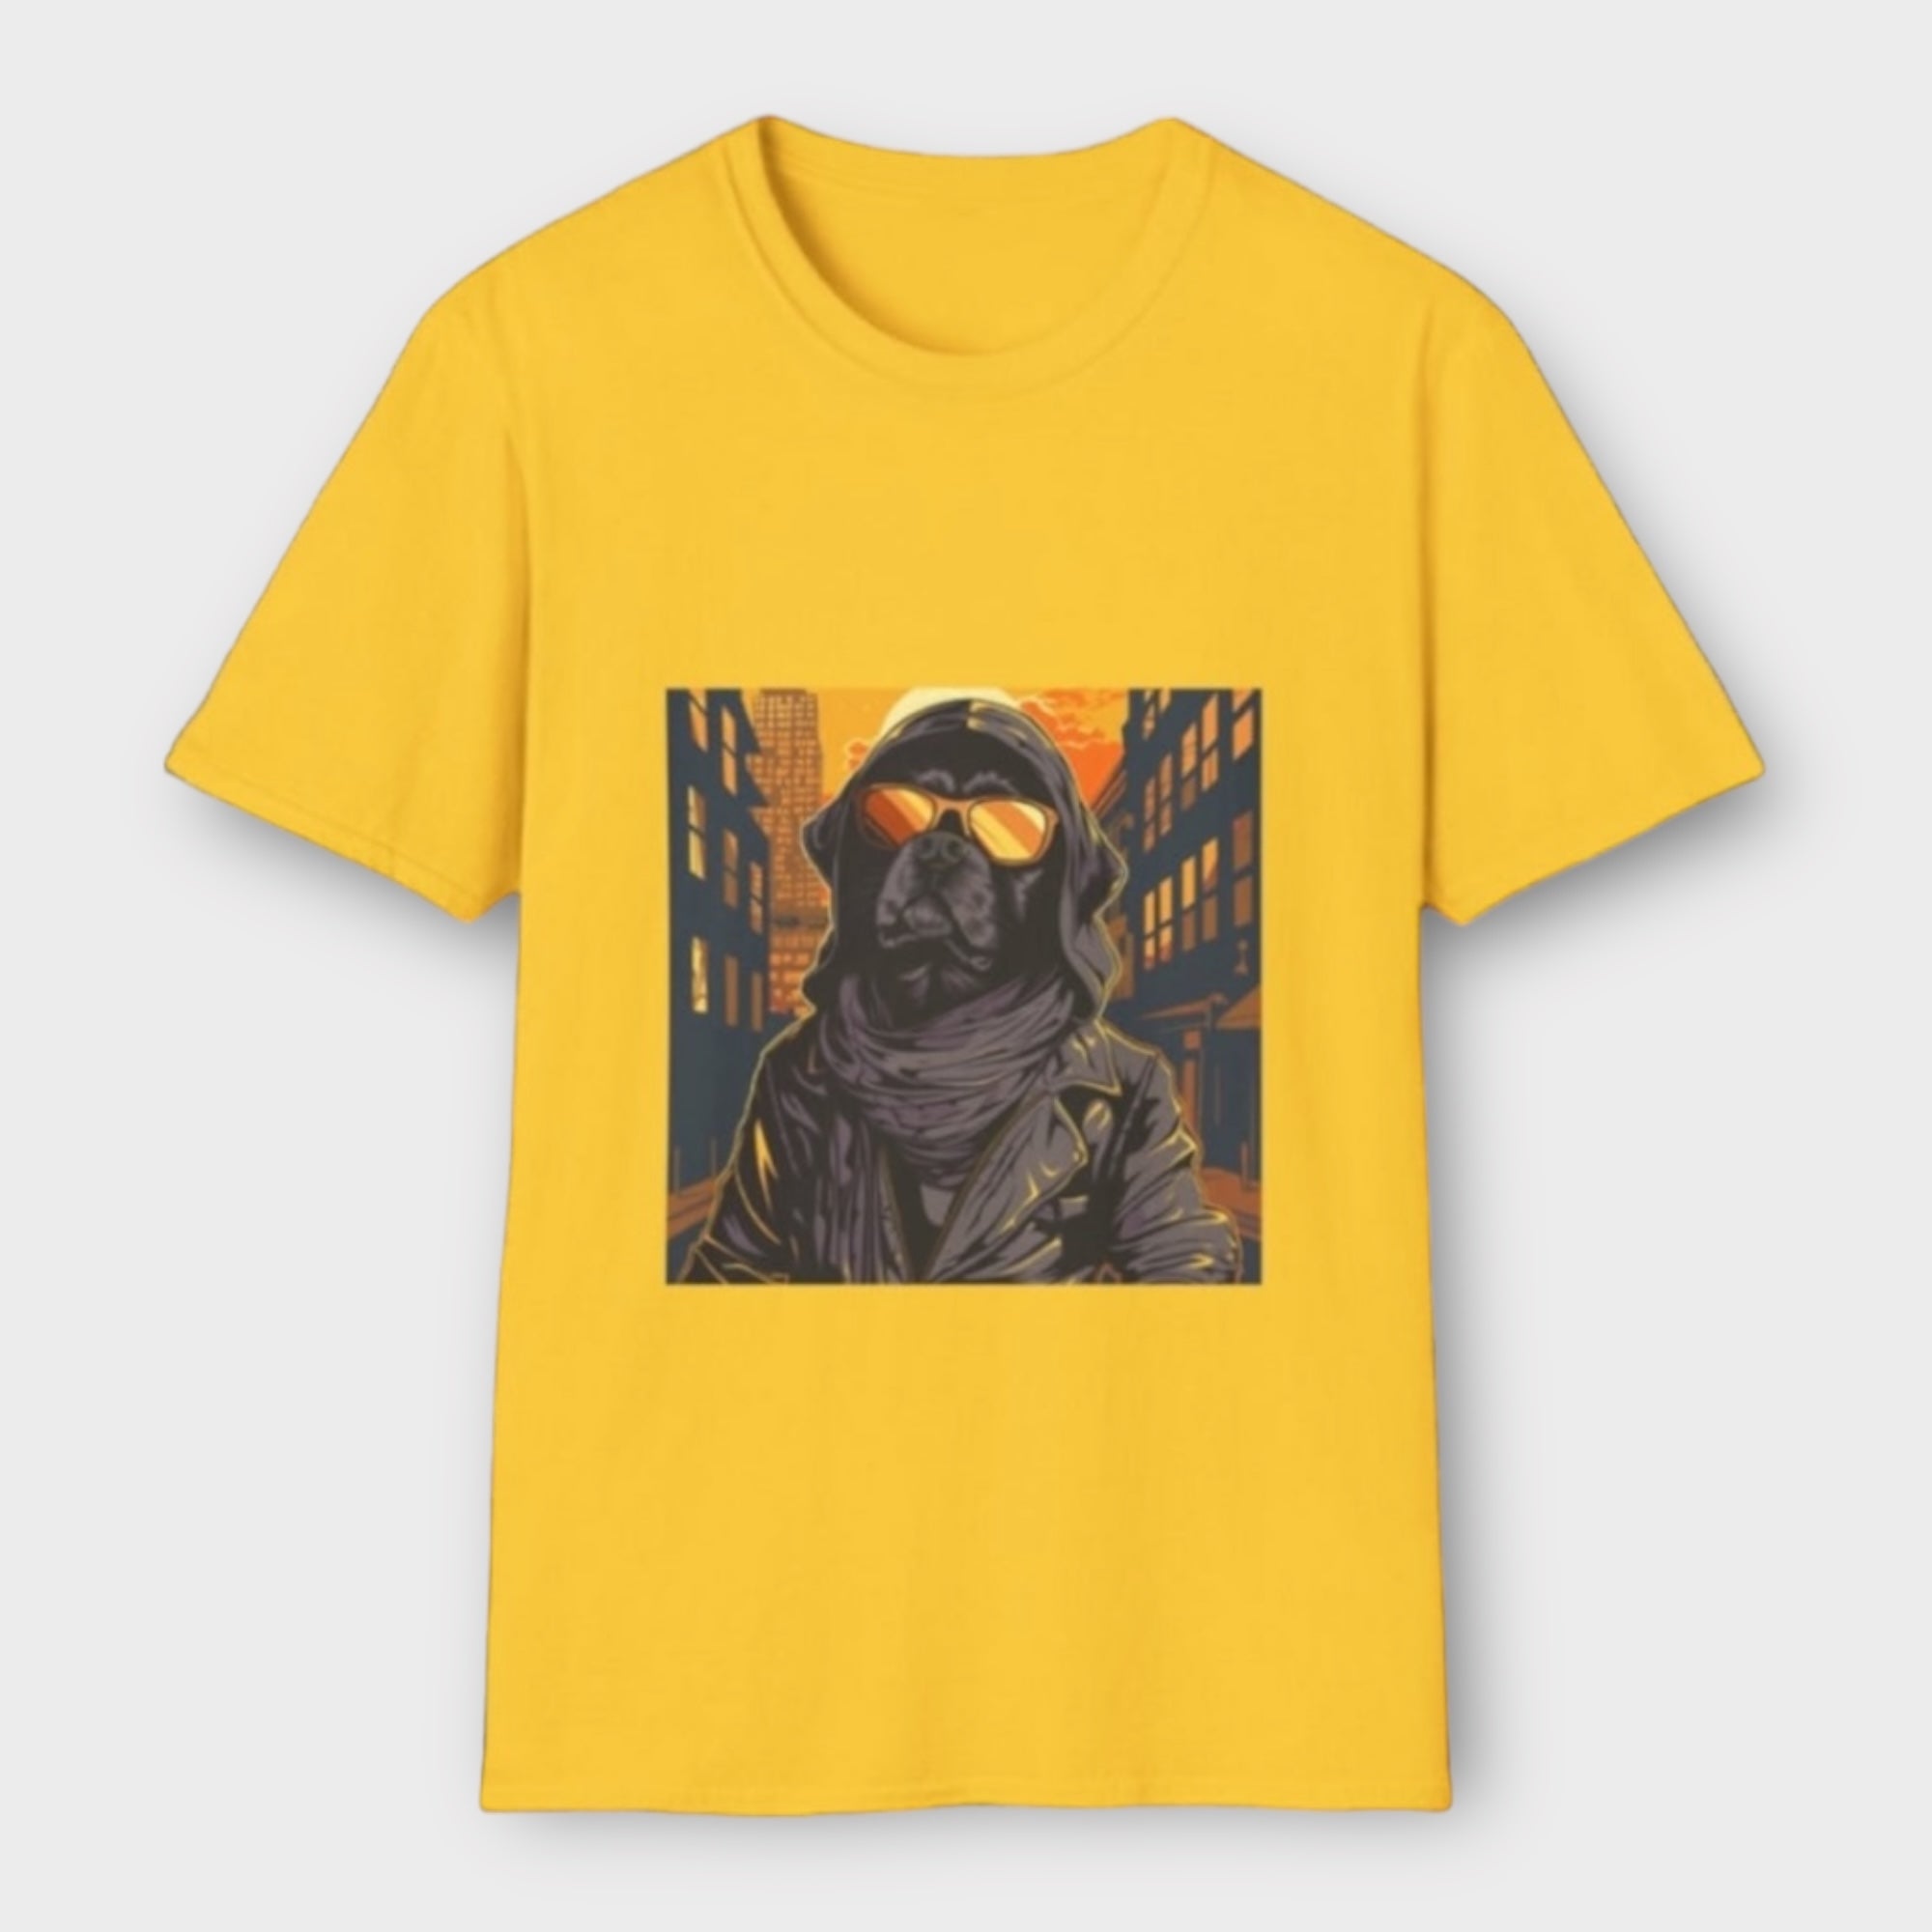 'YBM' Shirt of a dog with glasses